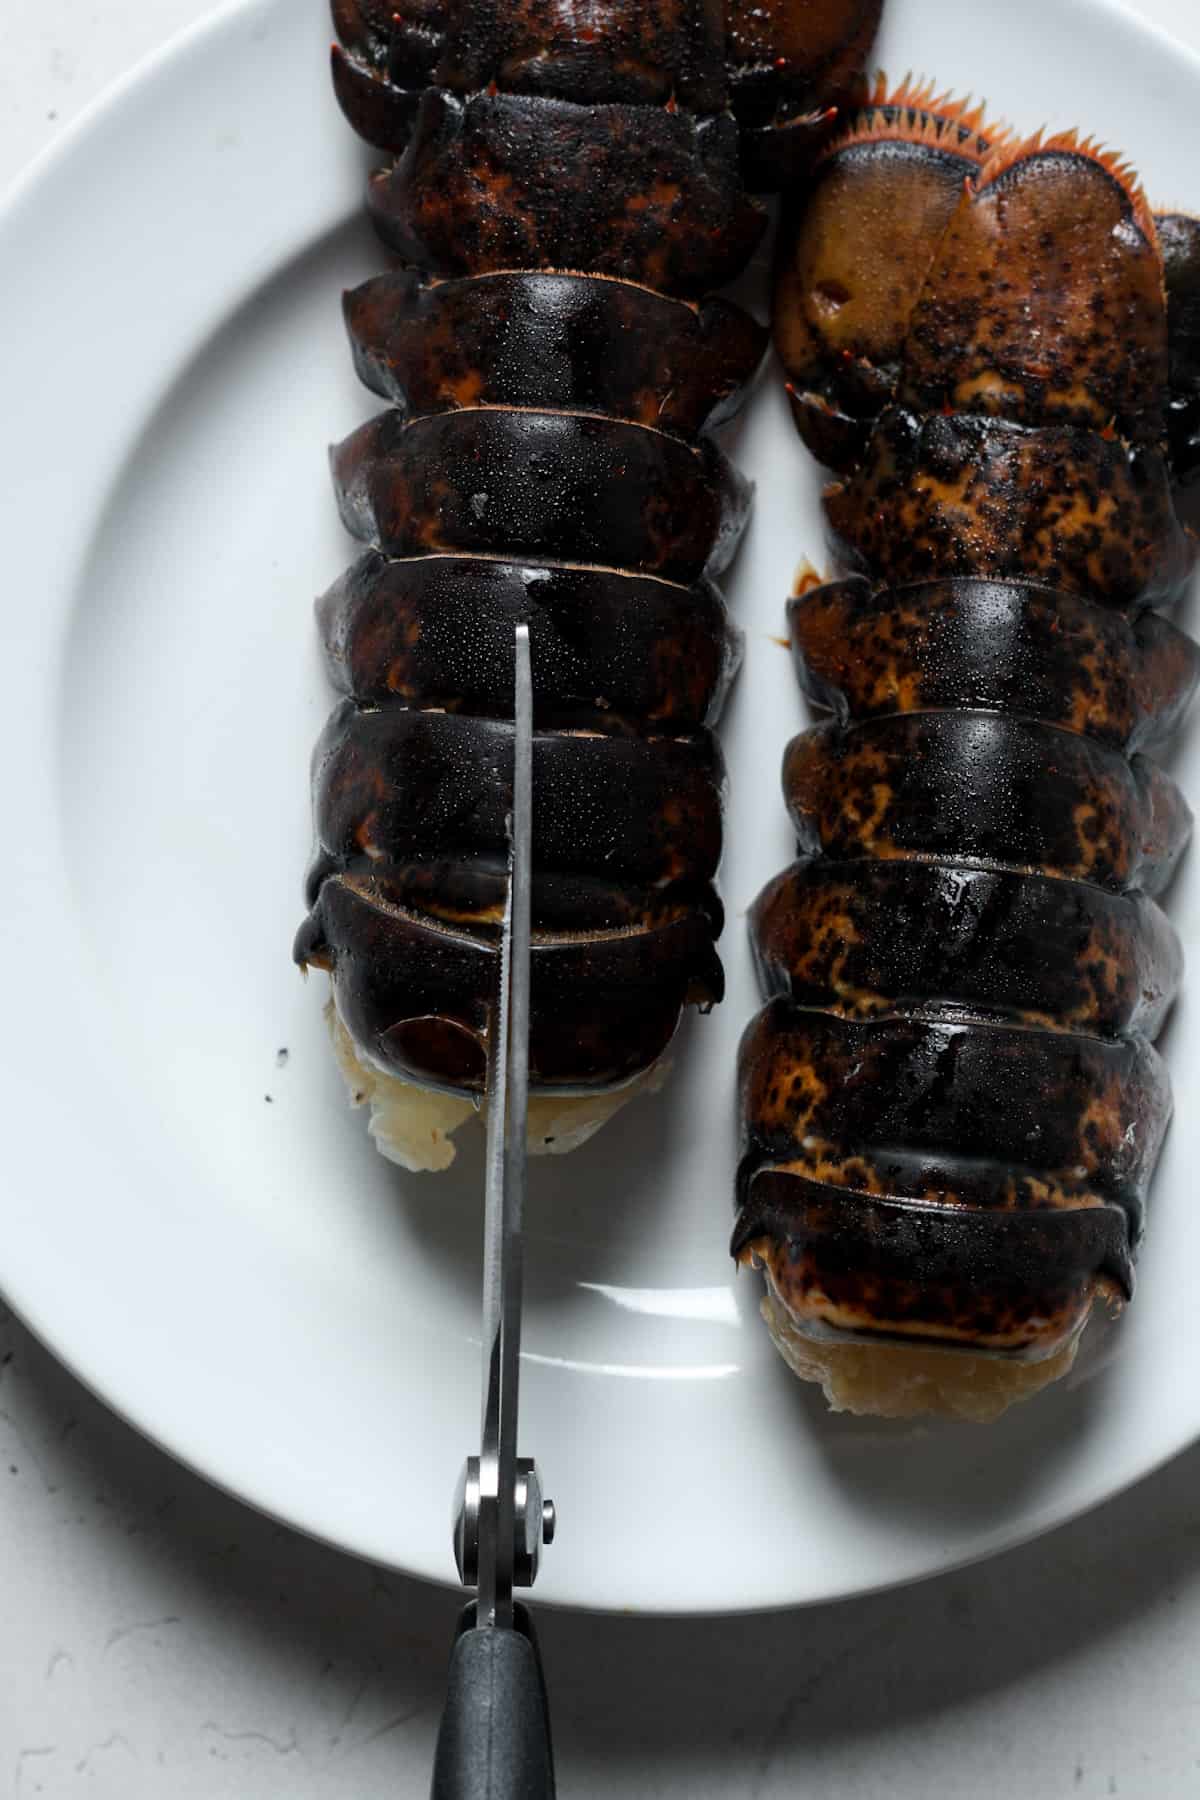 Scissors with lobster tails.